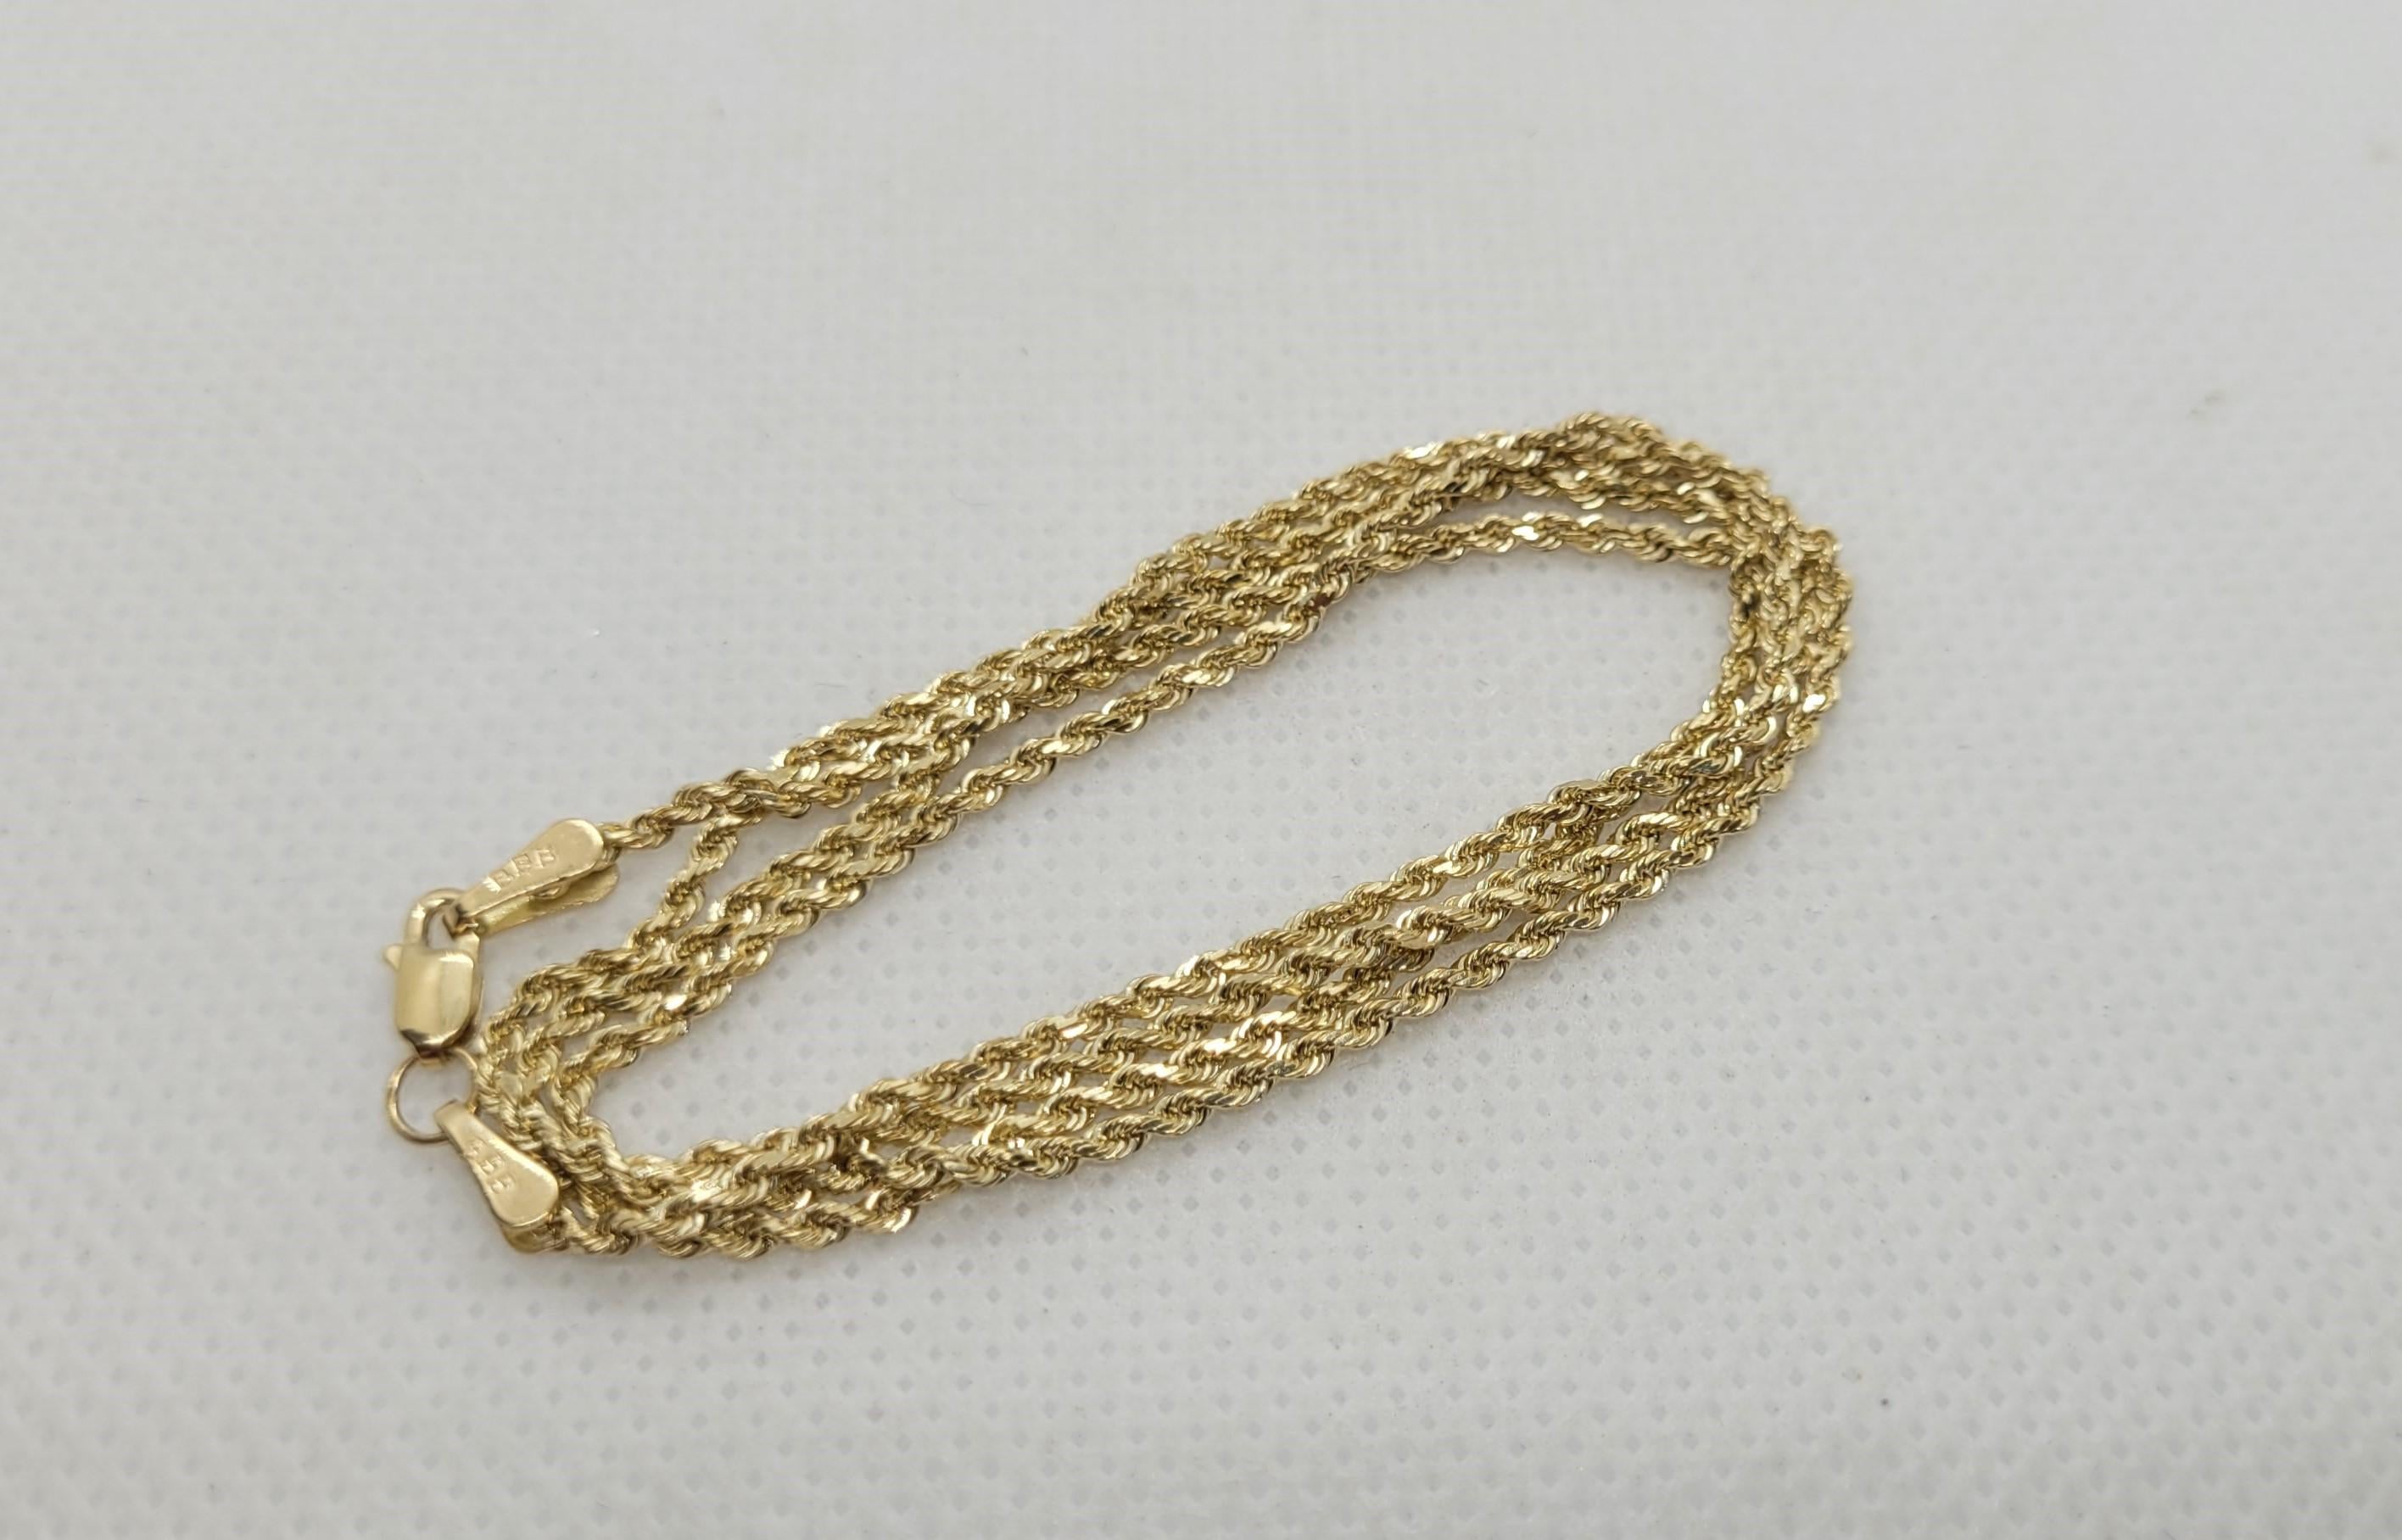 14kt Gold Rope Chain, 20 Inch Length, 1.6mm, 4.8 Grams, Bailey Banks Biddle In Good Condition For Sale In Rancho Santa Fe, CA